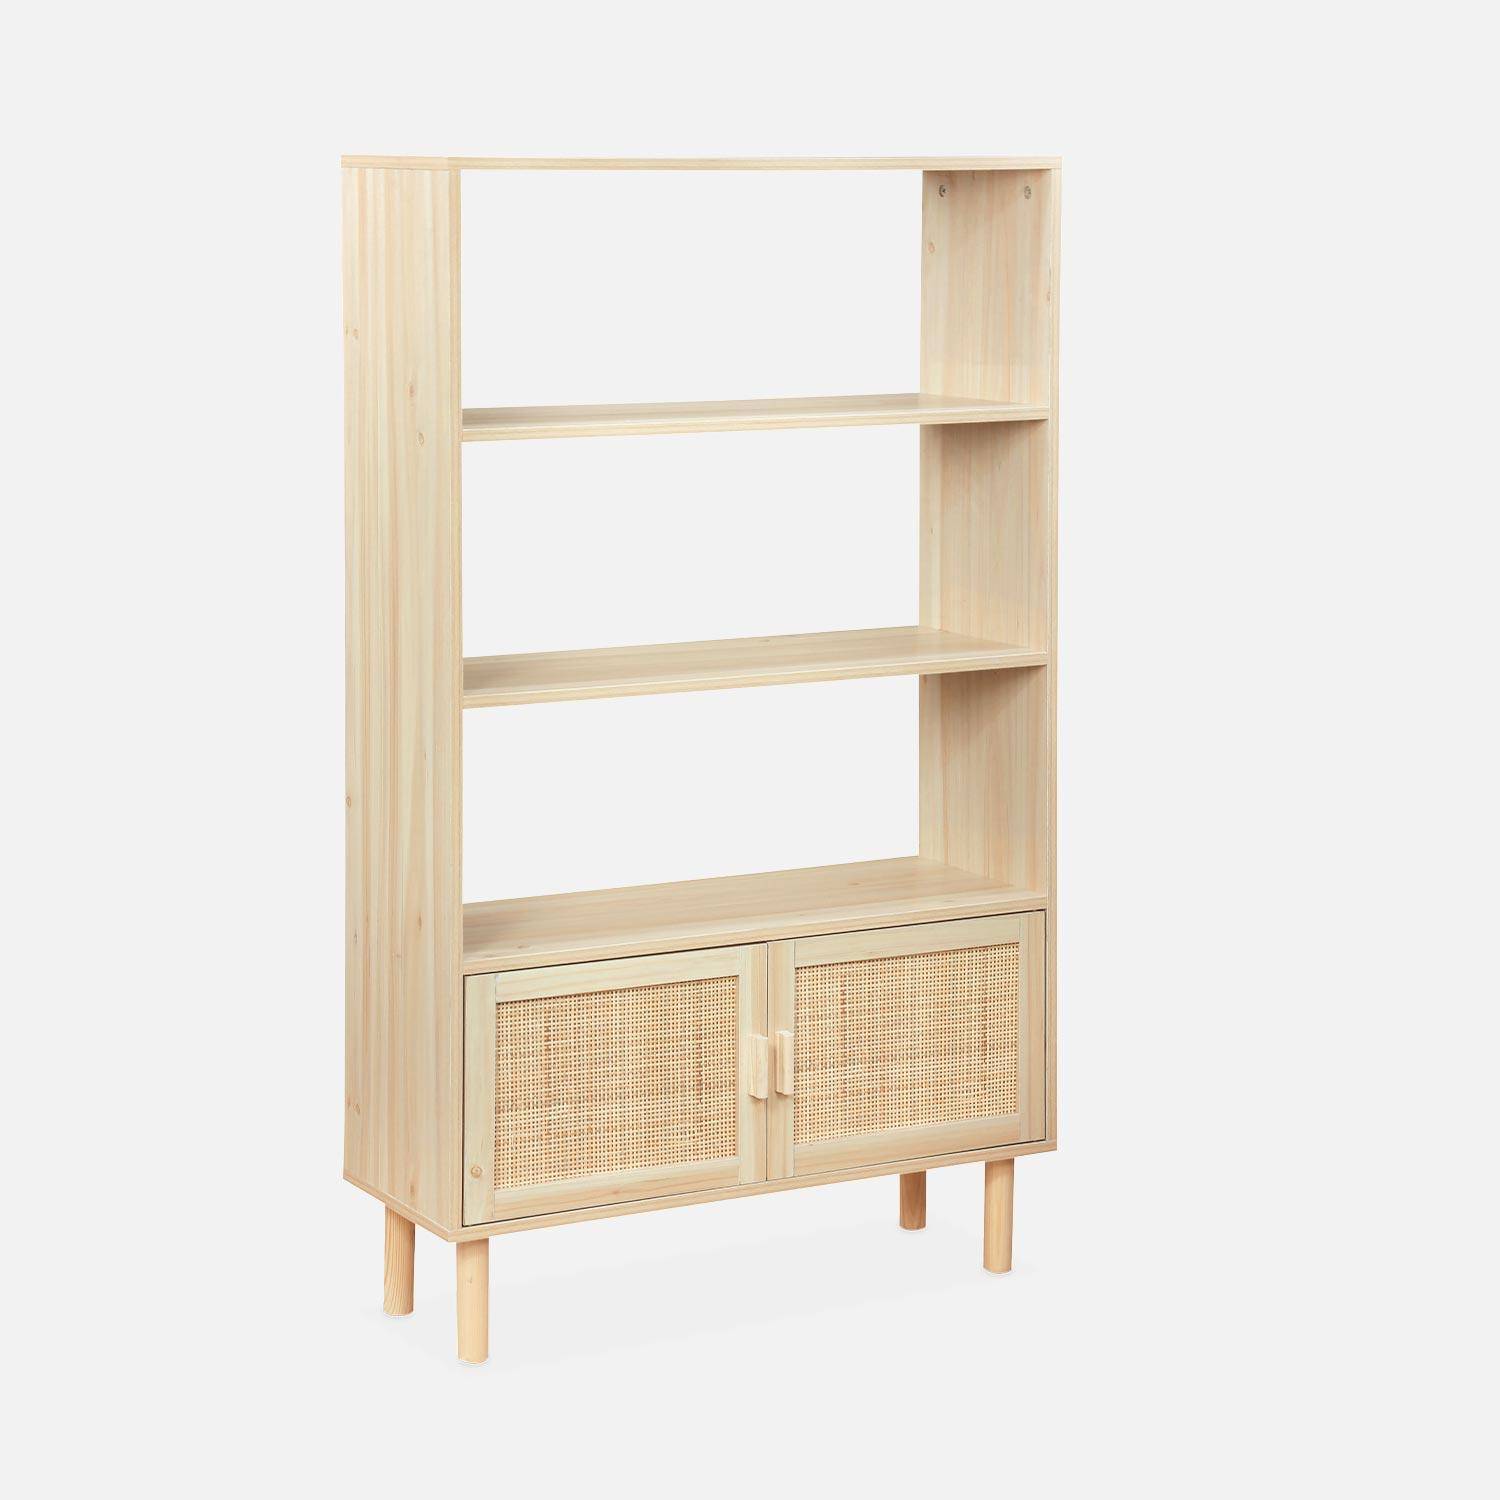 Woven rattan bookcase with storage cupboard, 3 shelves, 2 doors, 80x30x140cm - Camargue - Natural,sweeek,Photo3